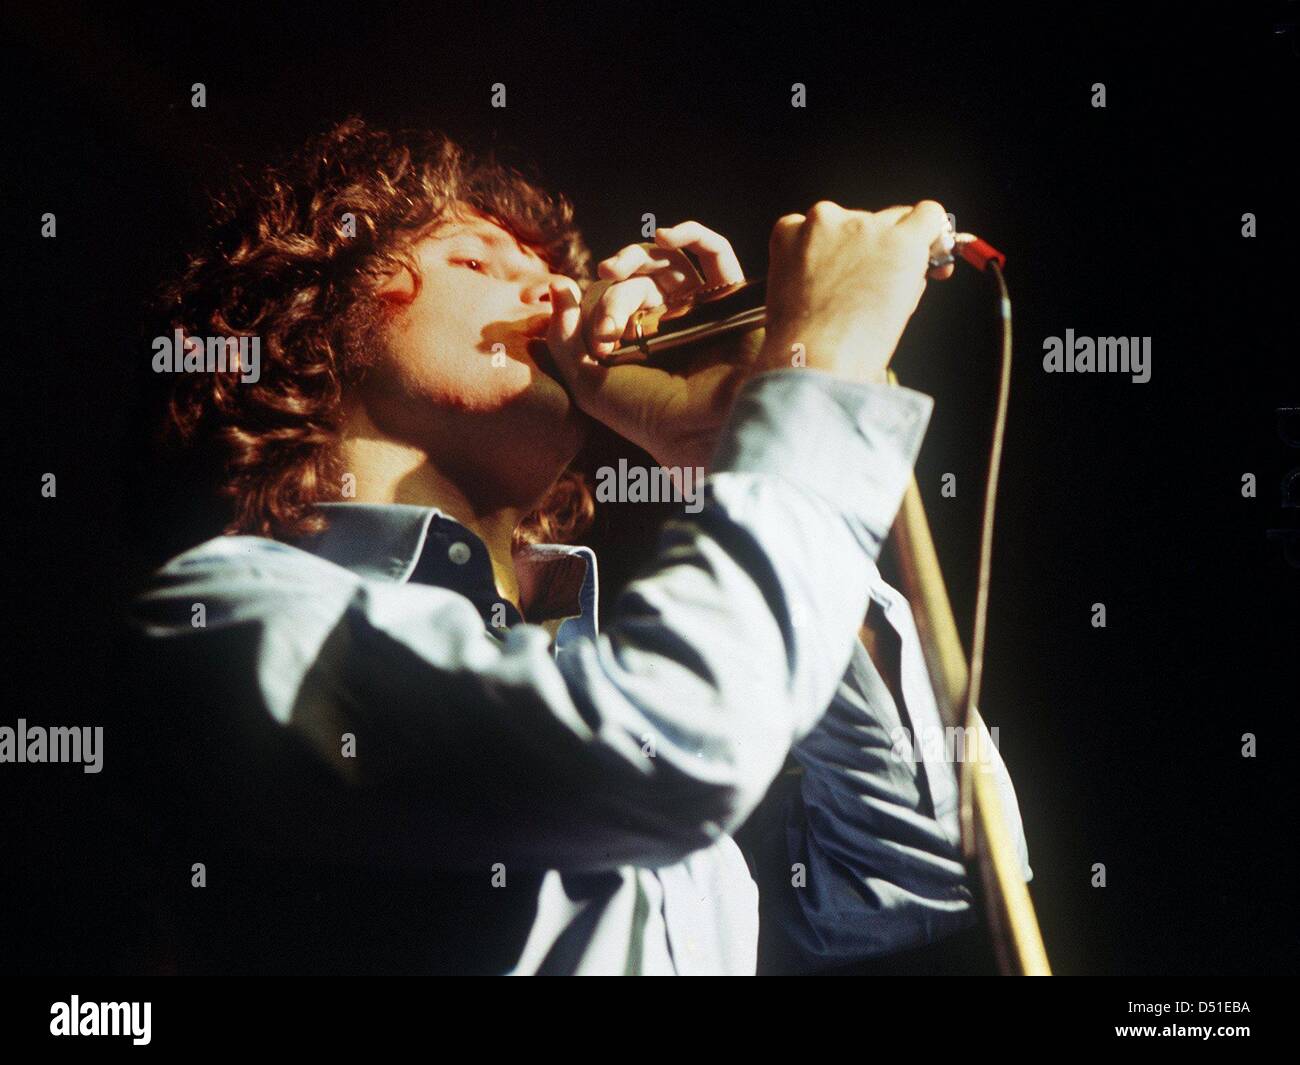 An undated file picture shows 'The Doors' singer Jim Morrison during a concert. Jim Morrison is supposed to be pardoned from the accusal of having denuded in public during a concert, by the parting gouvenor of Florida, Crist. Morrison, who died in July 1971, was sentenced to a 500 Dollar fee and six months in custody. The case will be decided on on Tuesday 7 December 2010. Photo: d Stock Photo